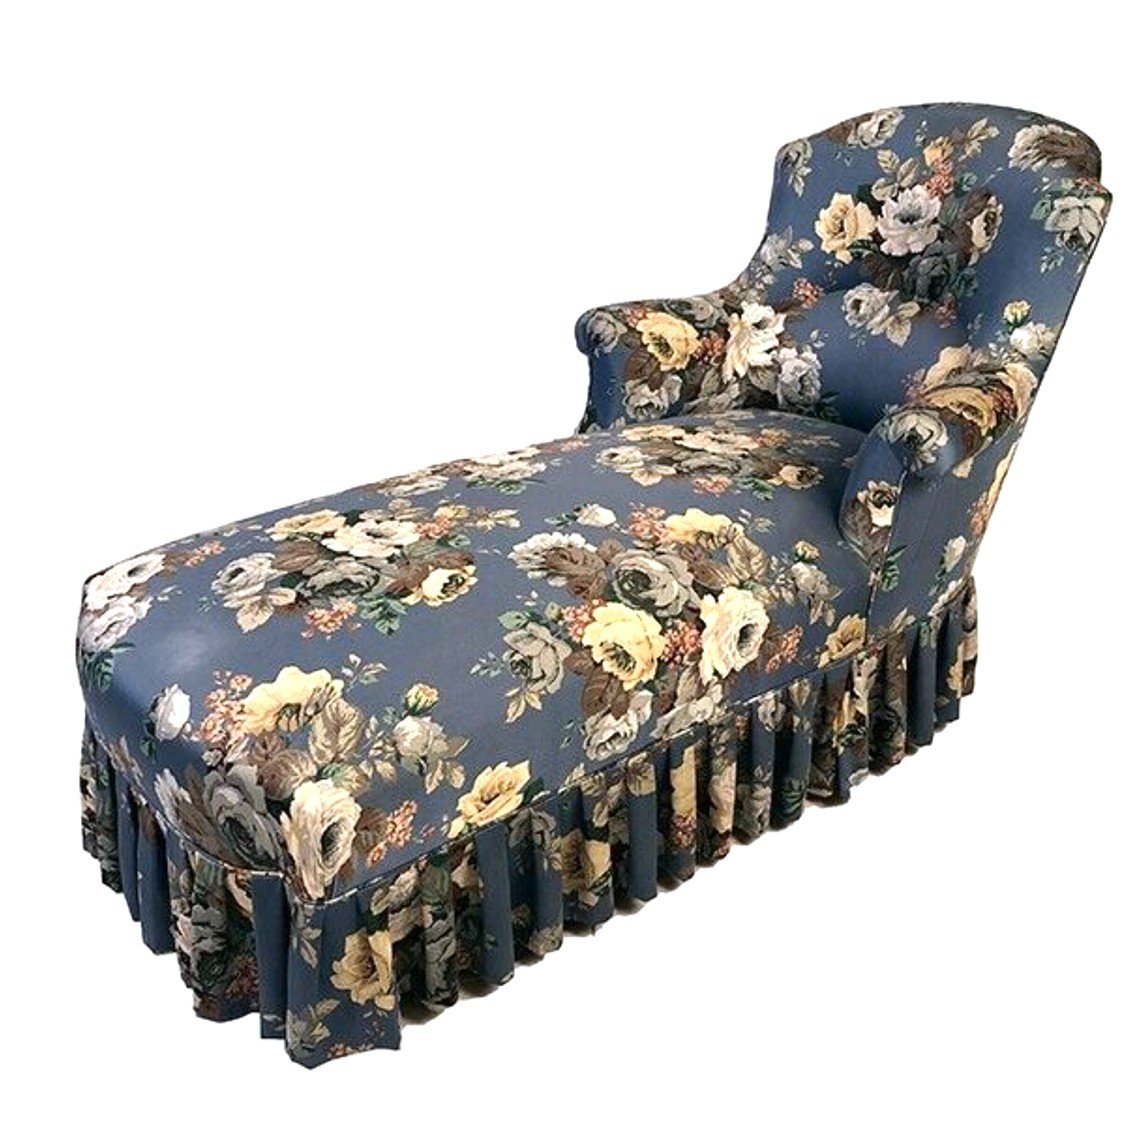 Napoleon III Daybed, Recent Upholstery And Fabric